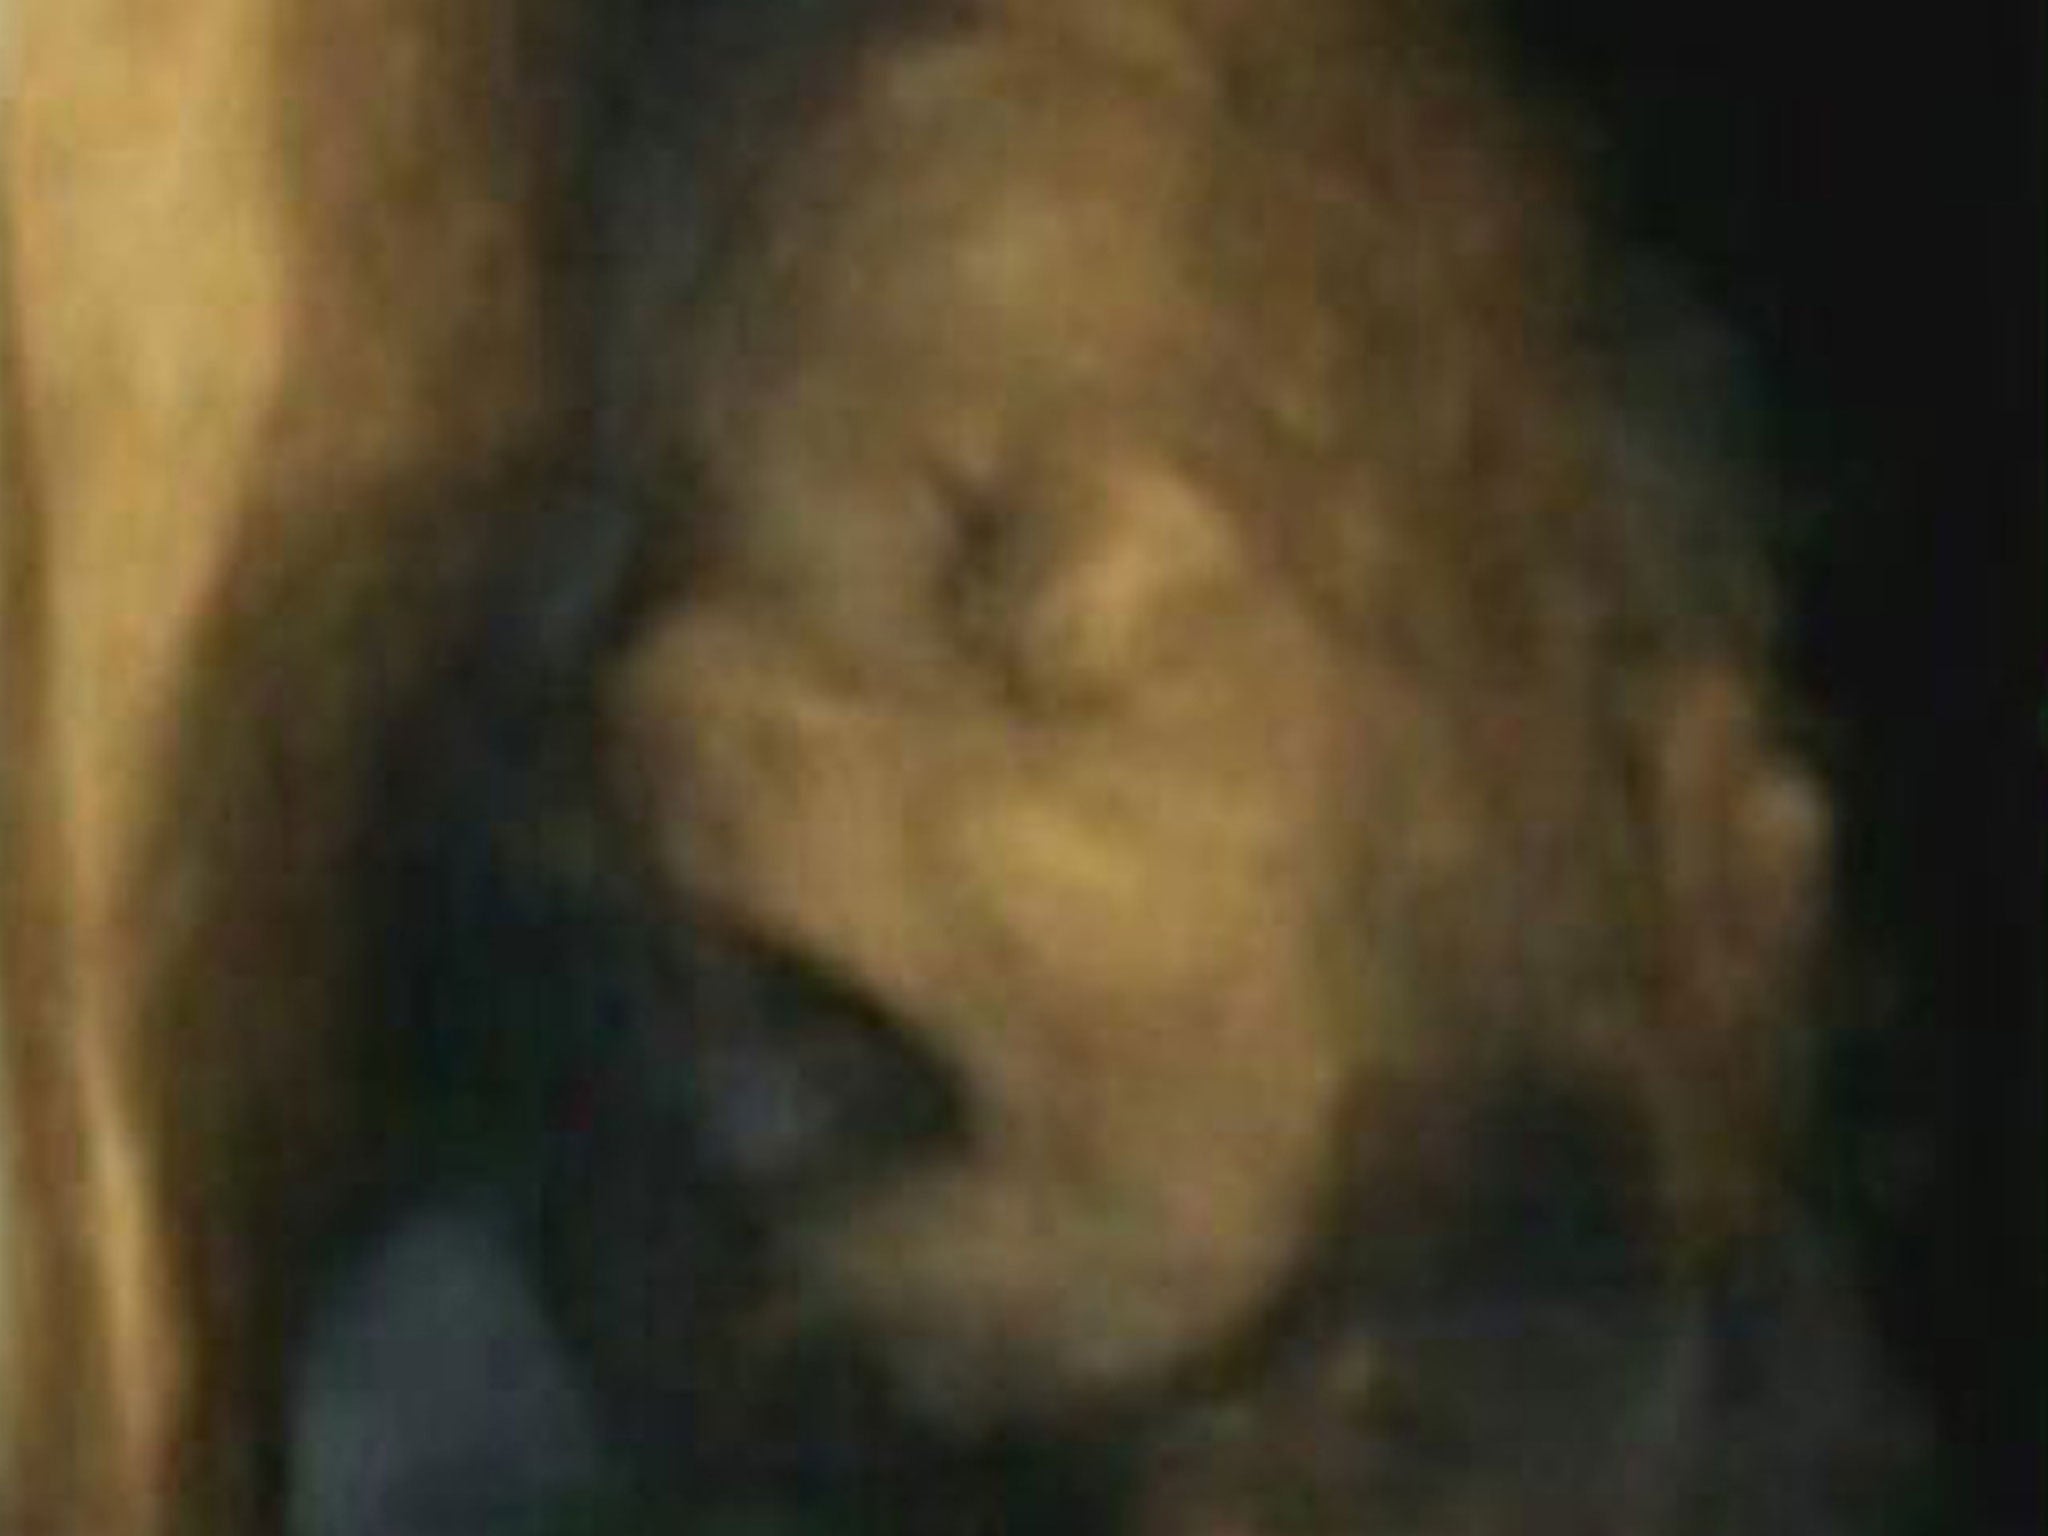 A 4D ultrasound scan shows a foetus yawning in the womb at 24 weeks